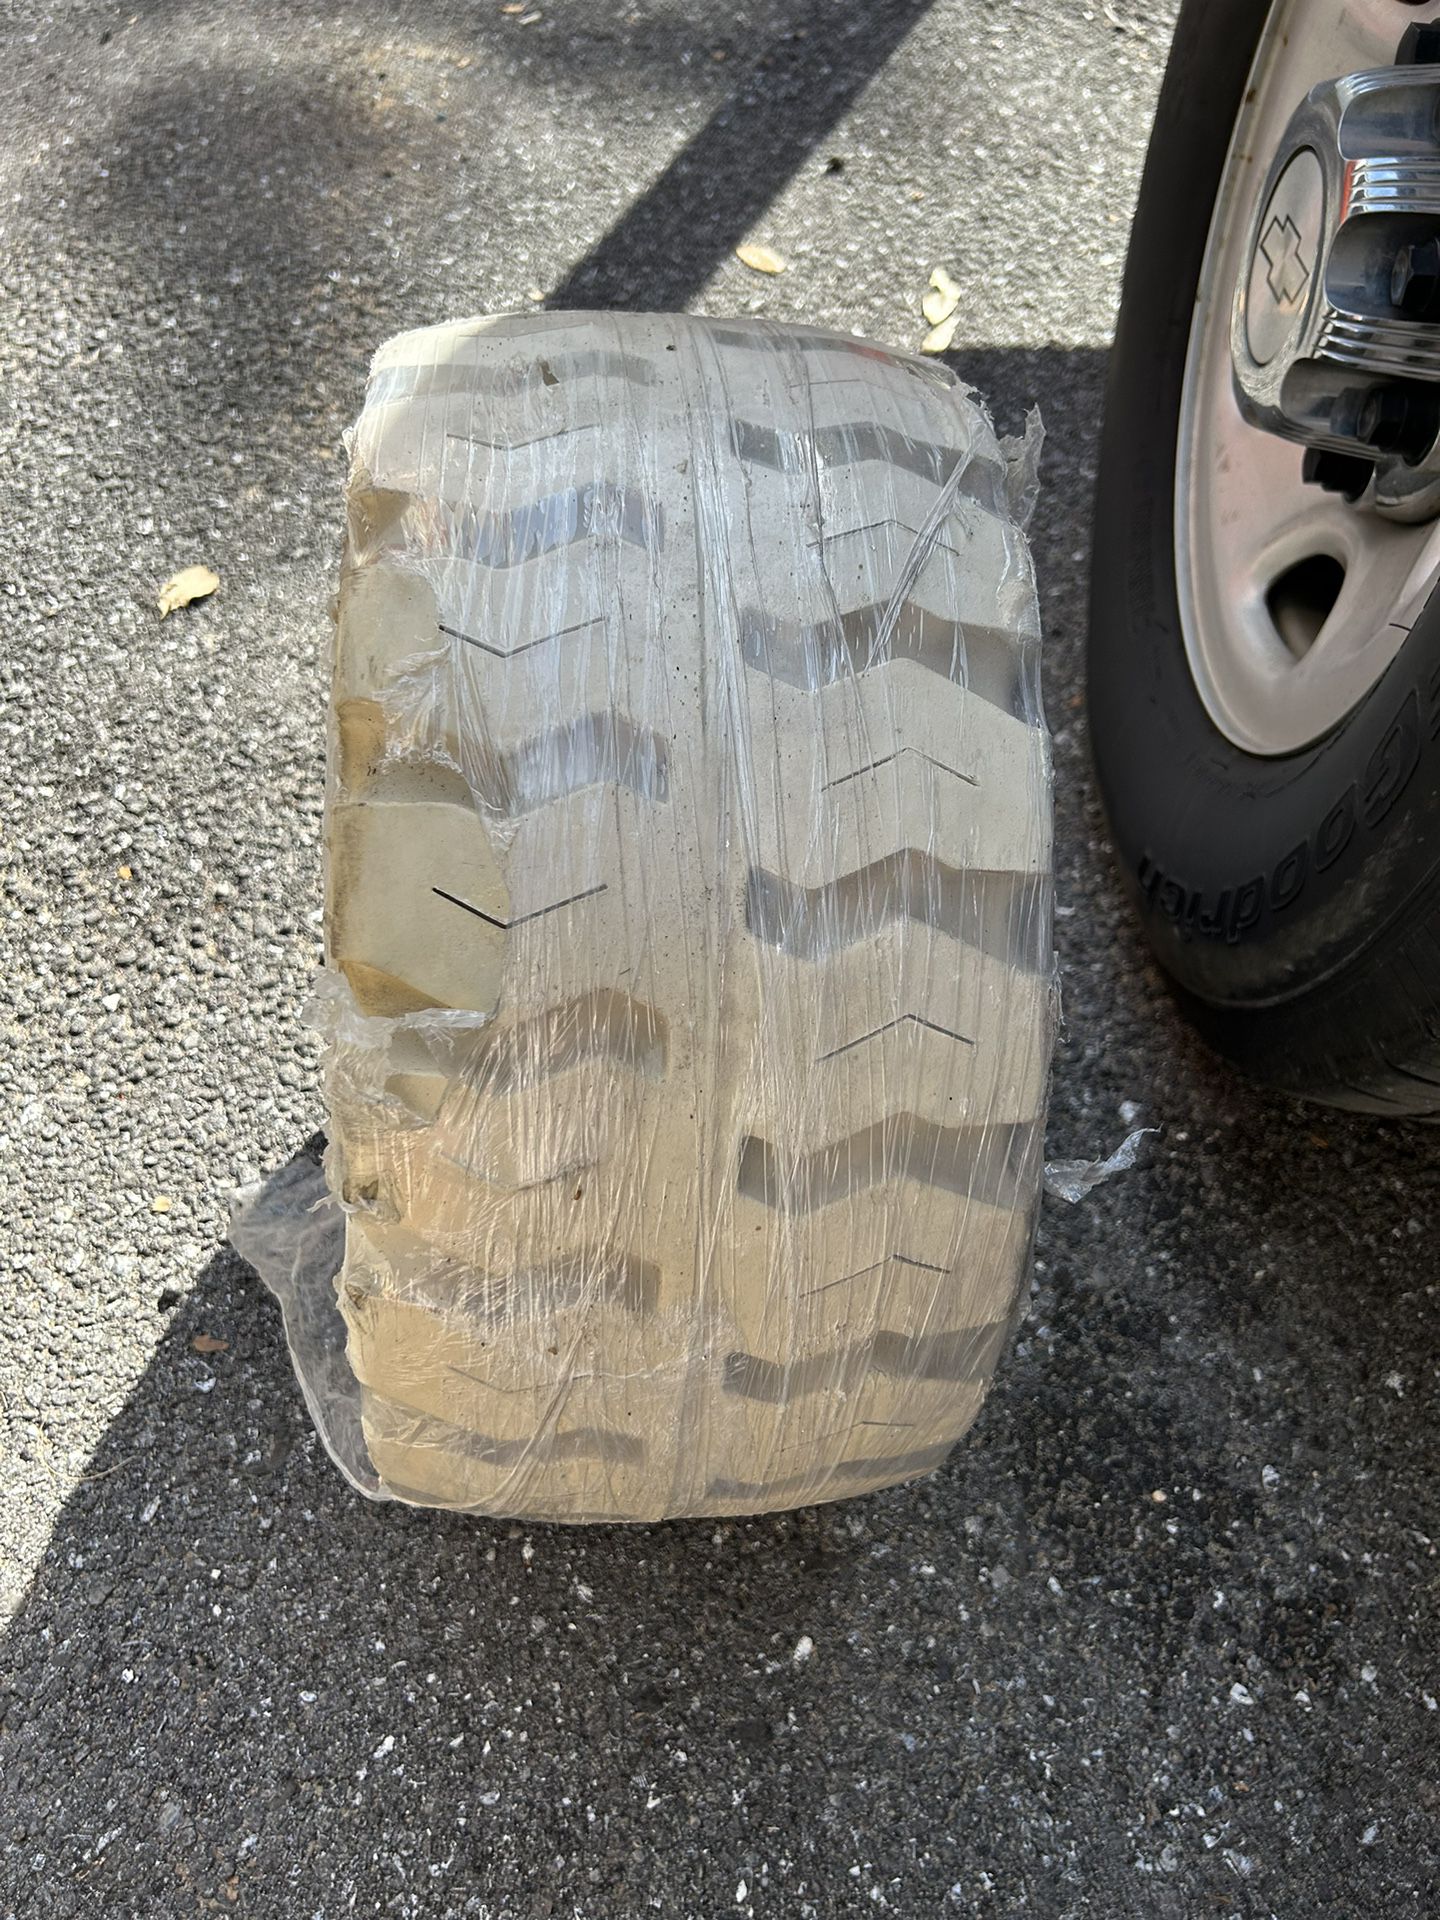 Monograph Forklift Tire New Asking $85